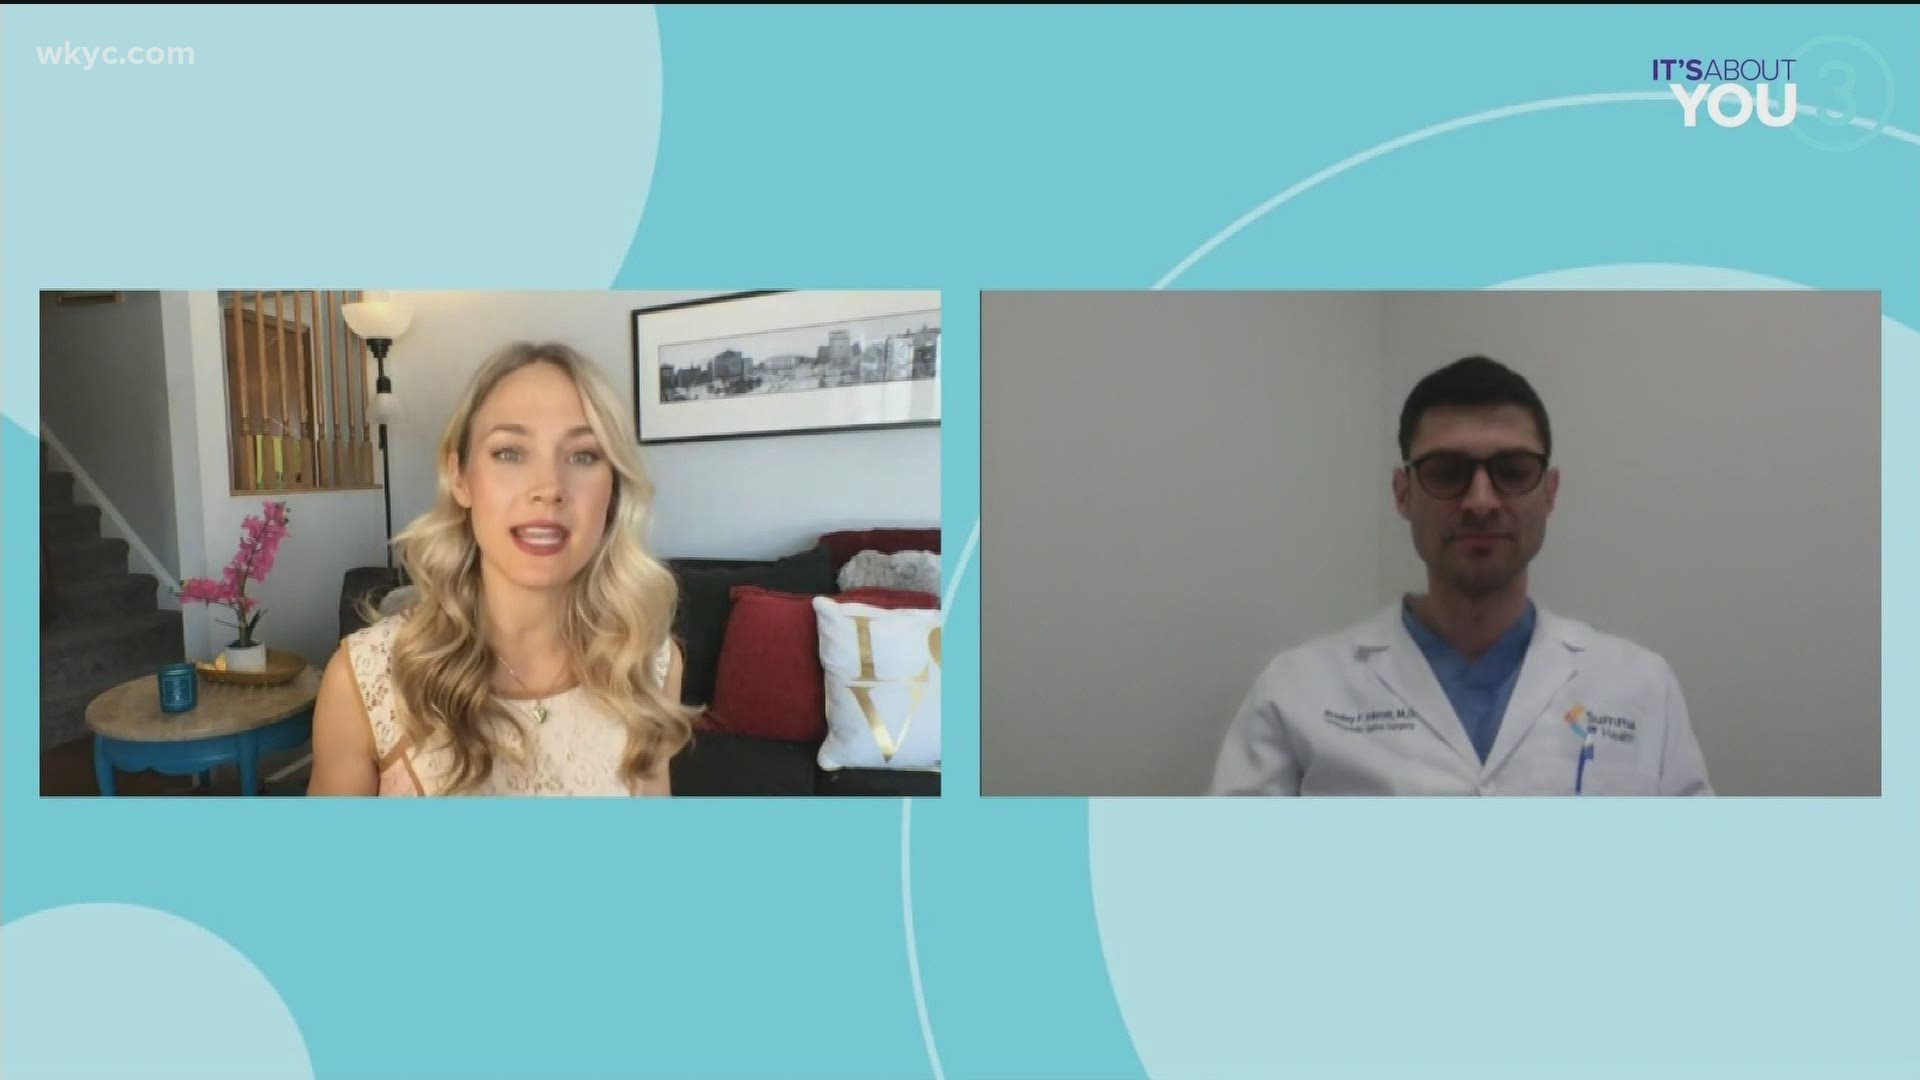 Alexa talks with Dr. Bradley Inkrott, from Summa Health, about chronic back pain and giving people their quality of life back.